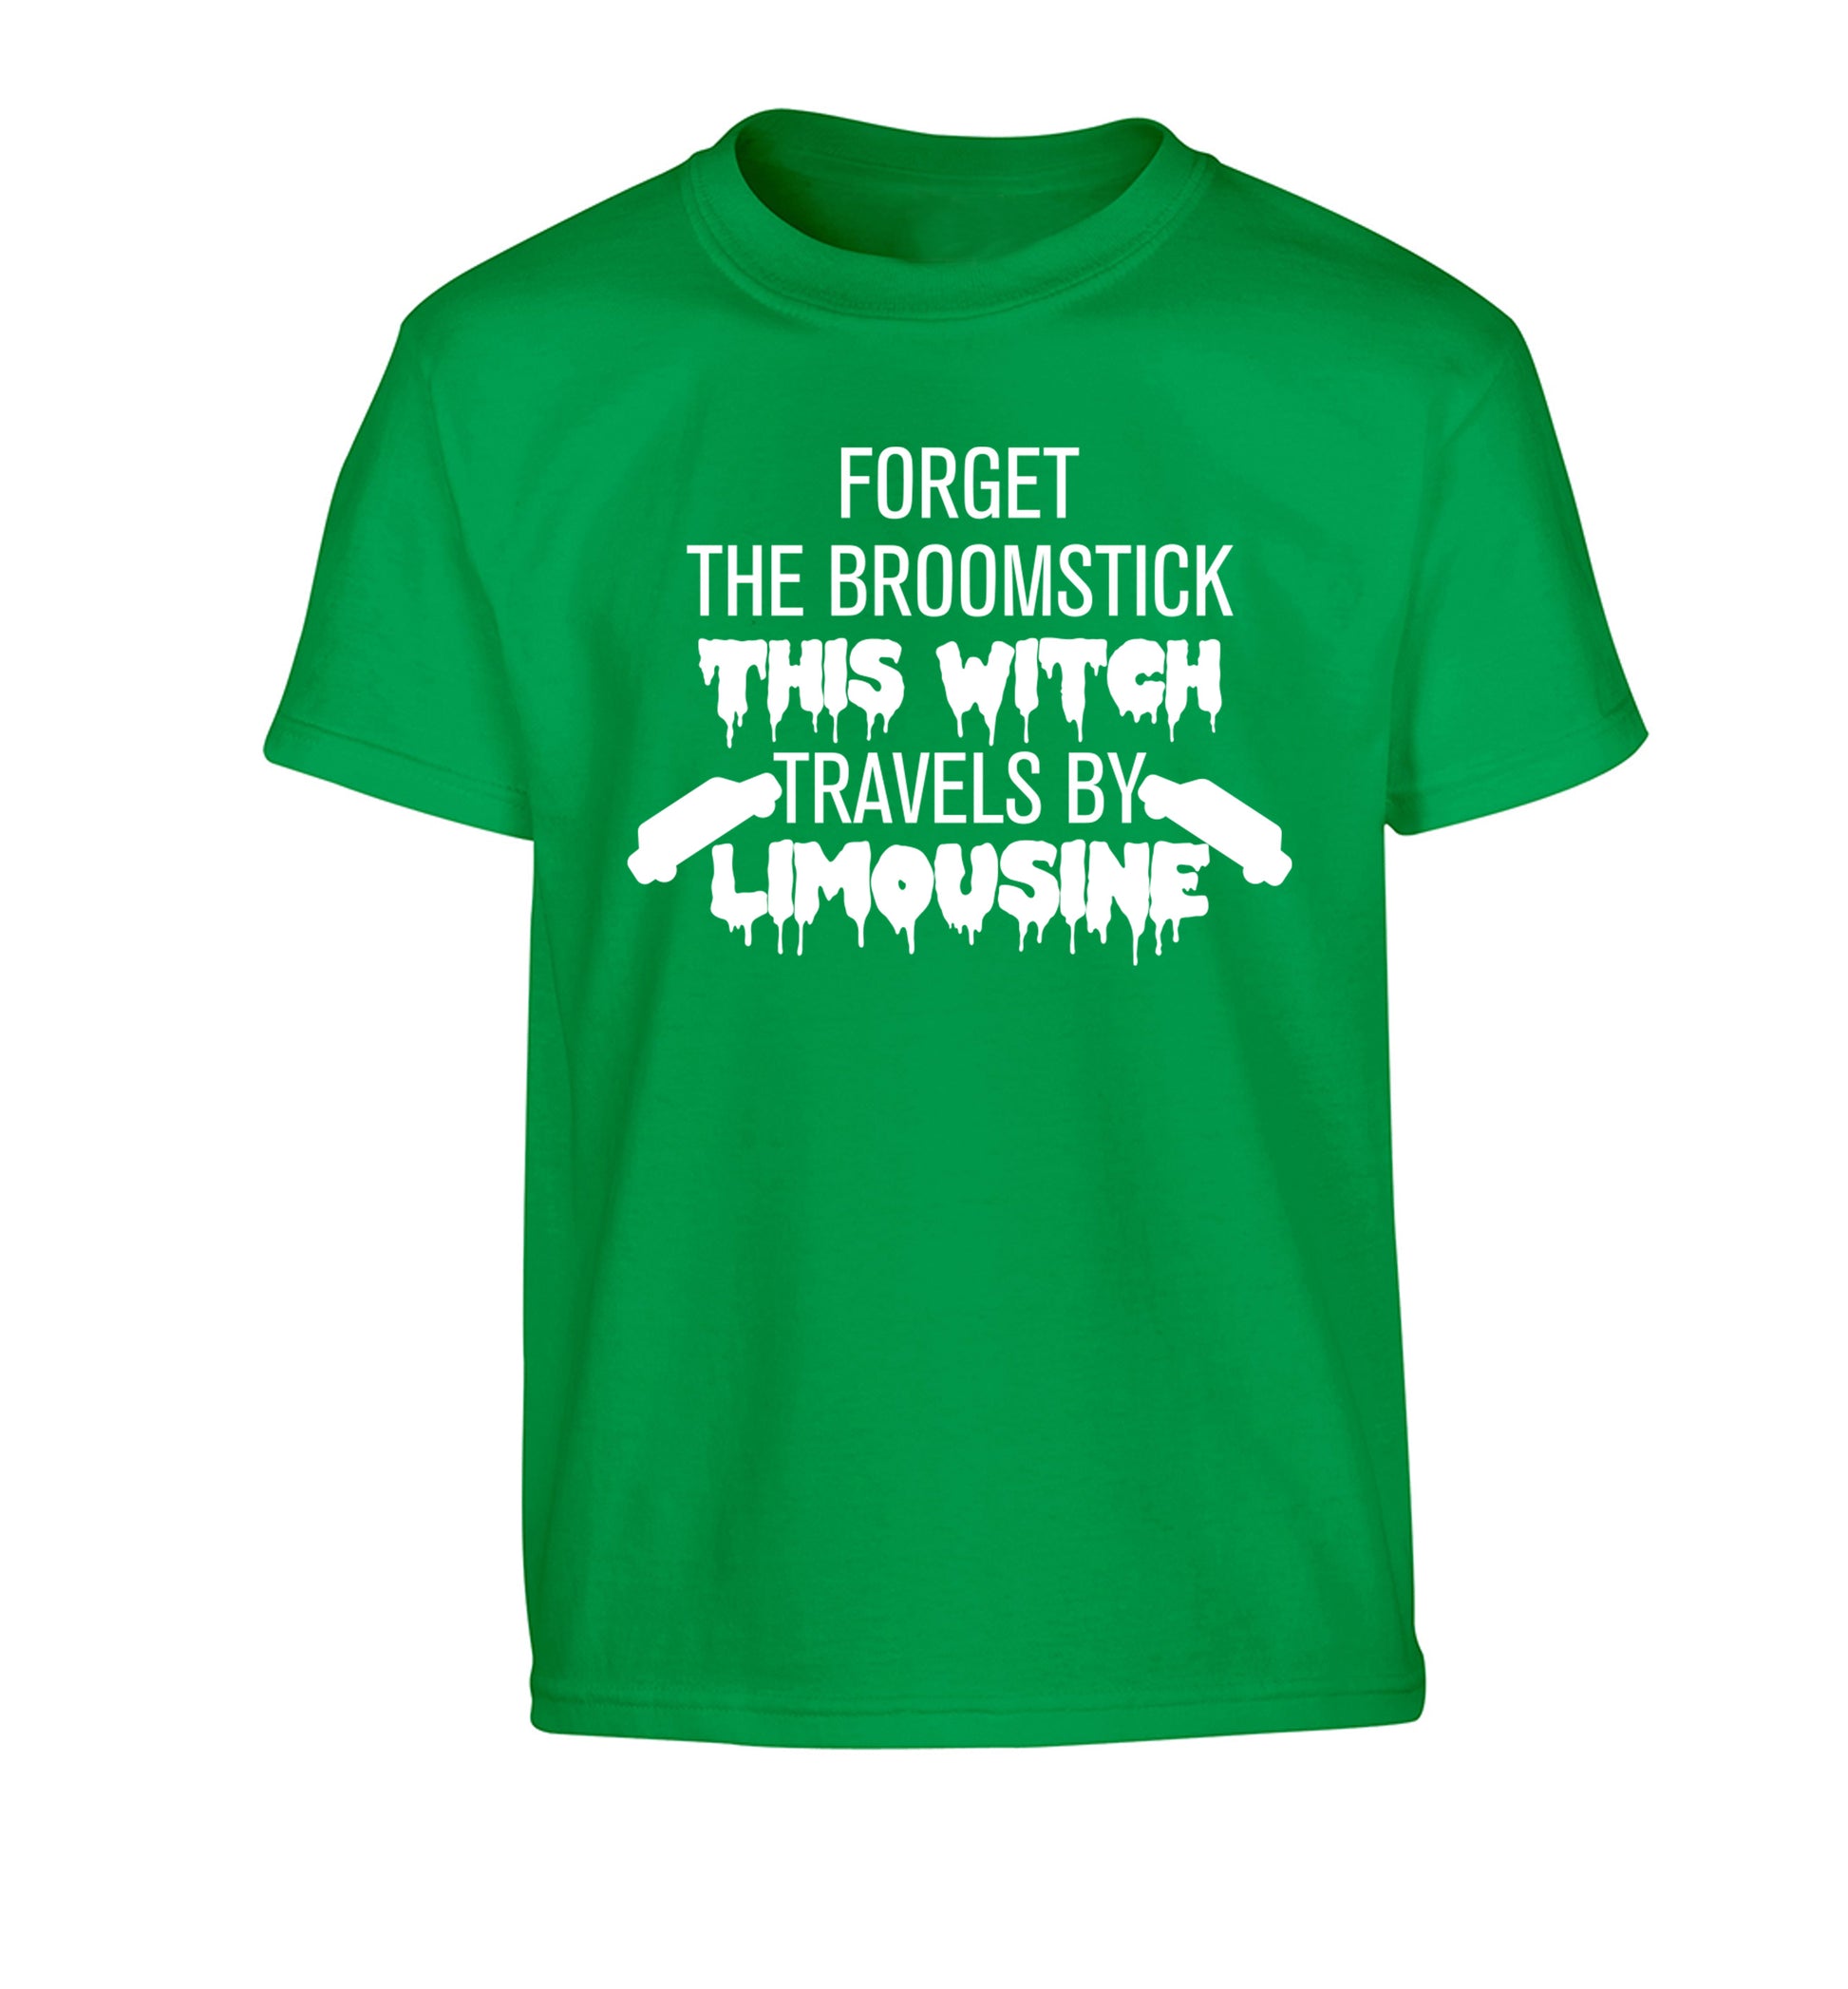 Forget the broomstick this witch travels by limousine Children's green Tshirt 12-14 Years